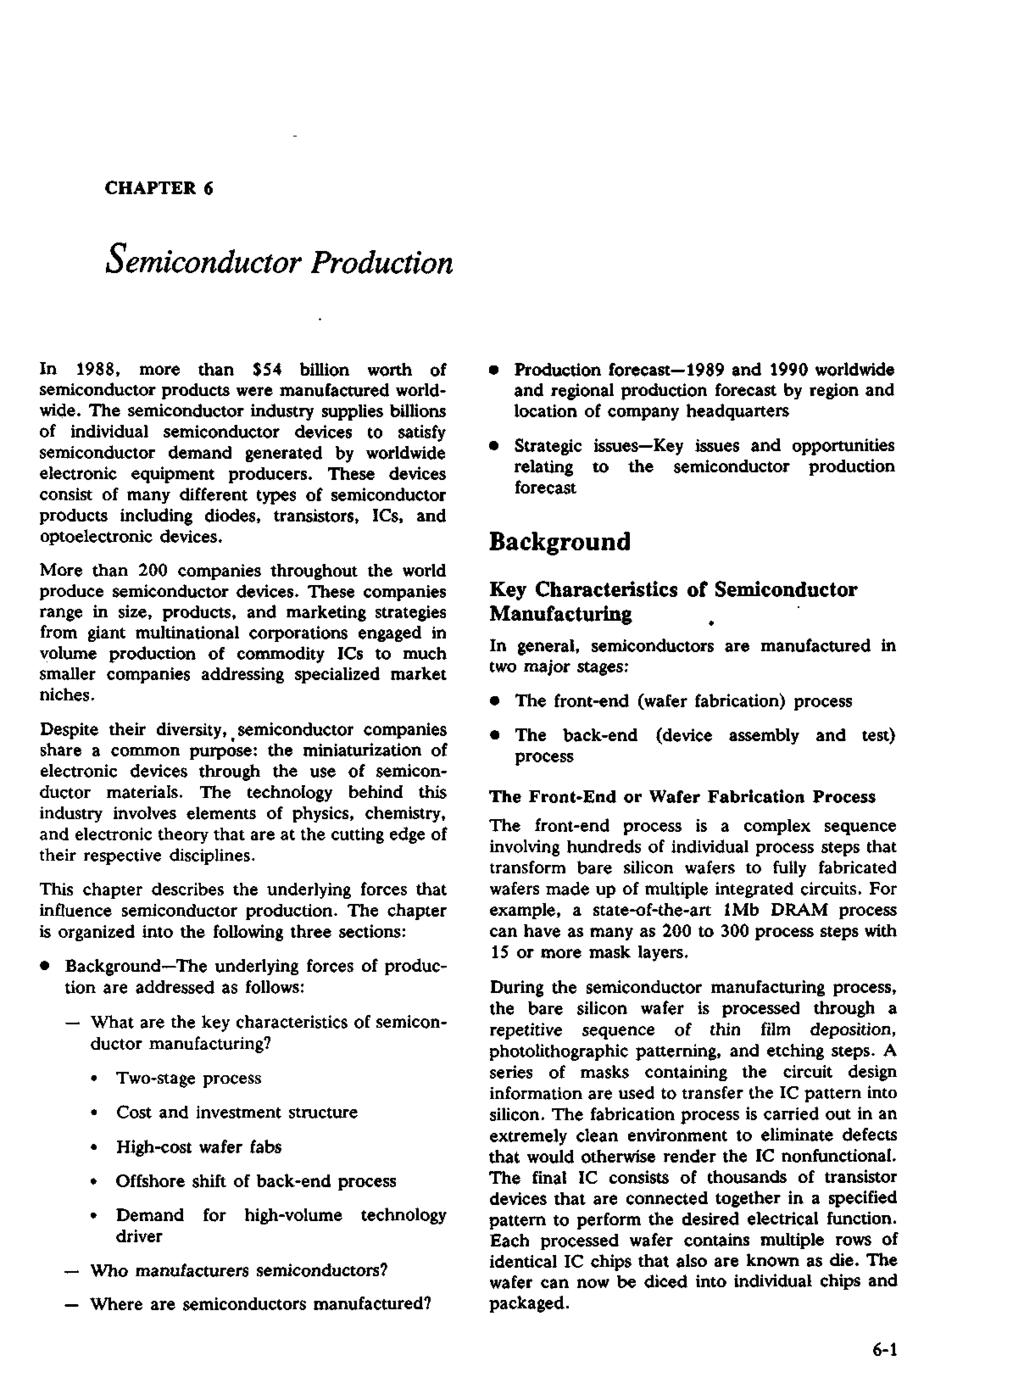 CHAPTER 6 Semiconductor Production In 1988, more than 54 billion worth of semiconductor products were manufactured worldwide.